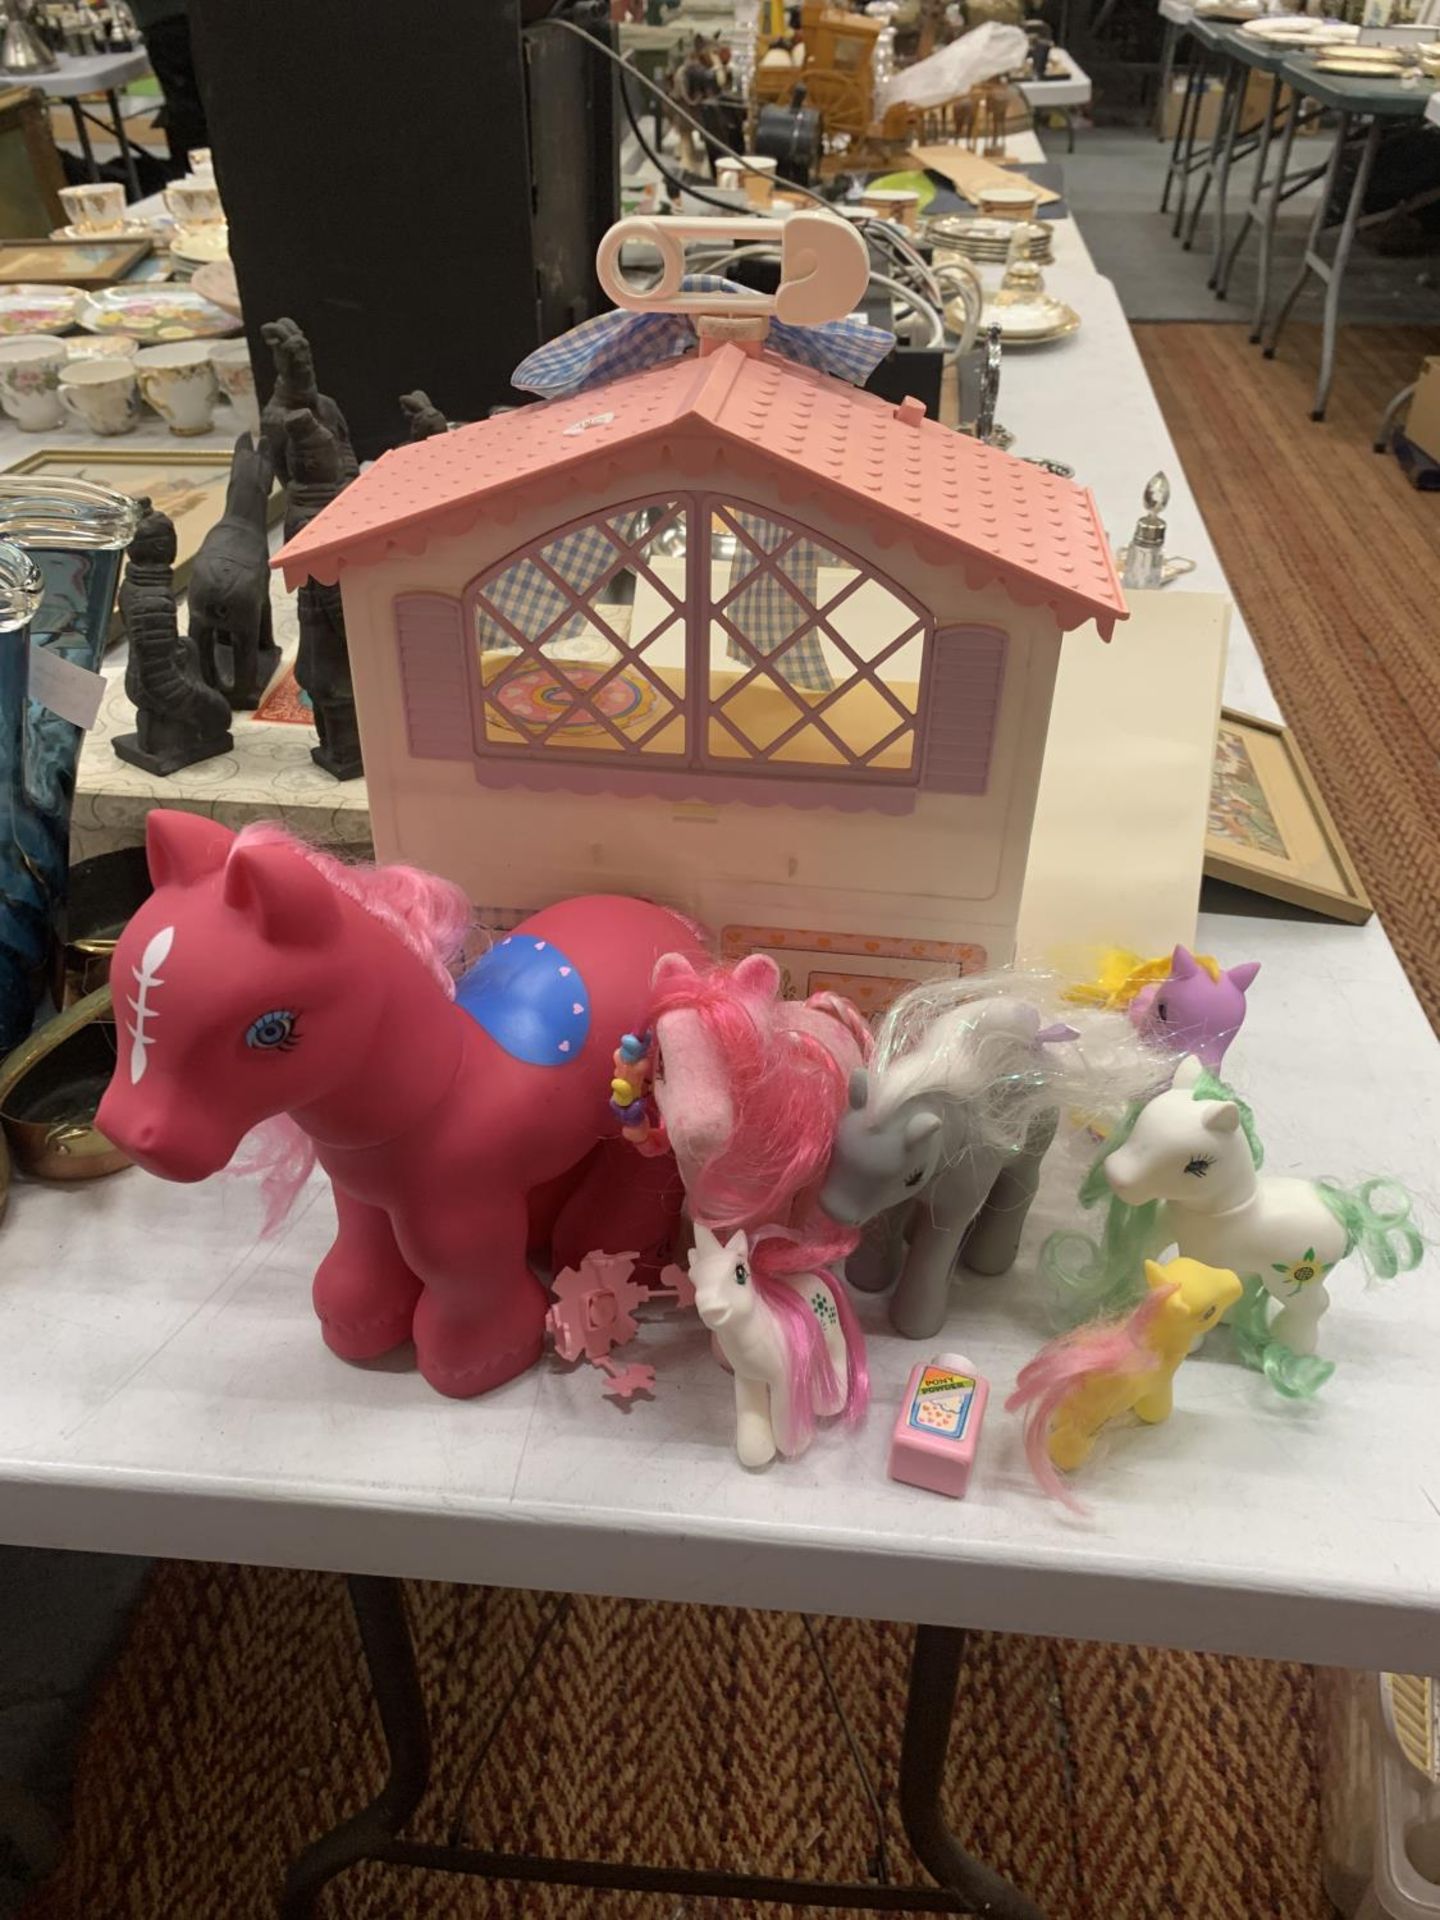 A MY LITTLE PONY STABLE HOUSE AND PONIES